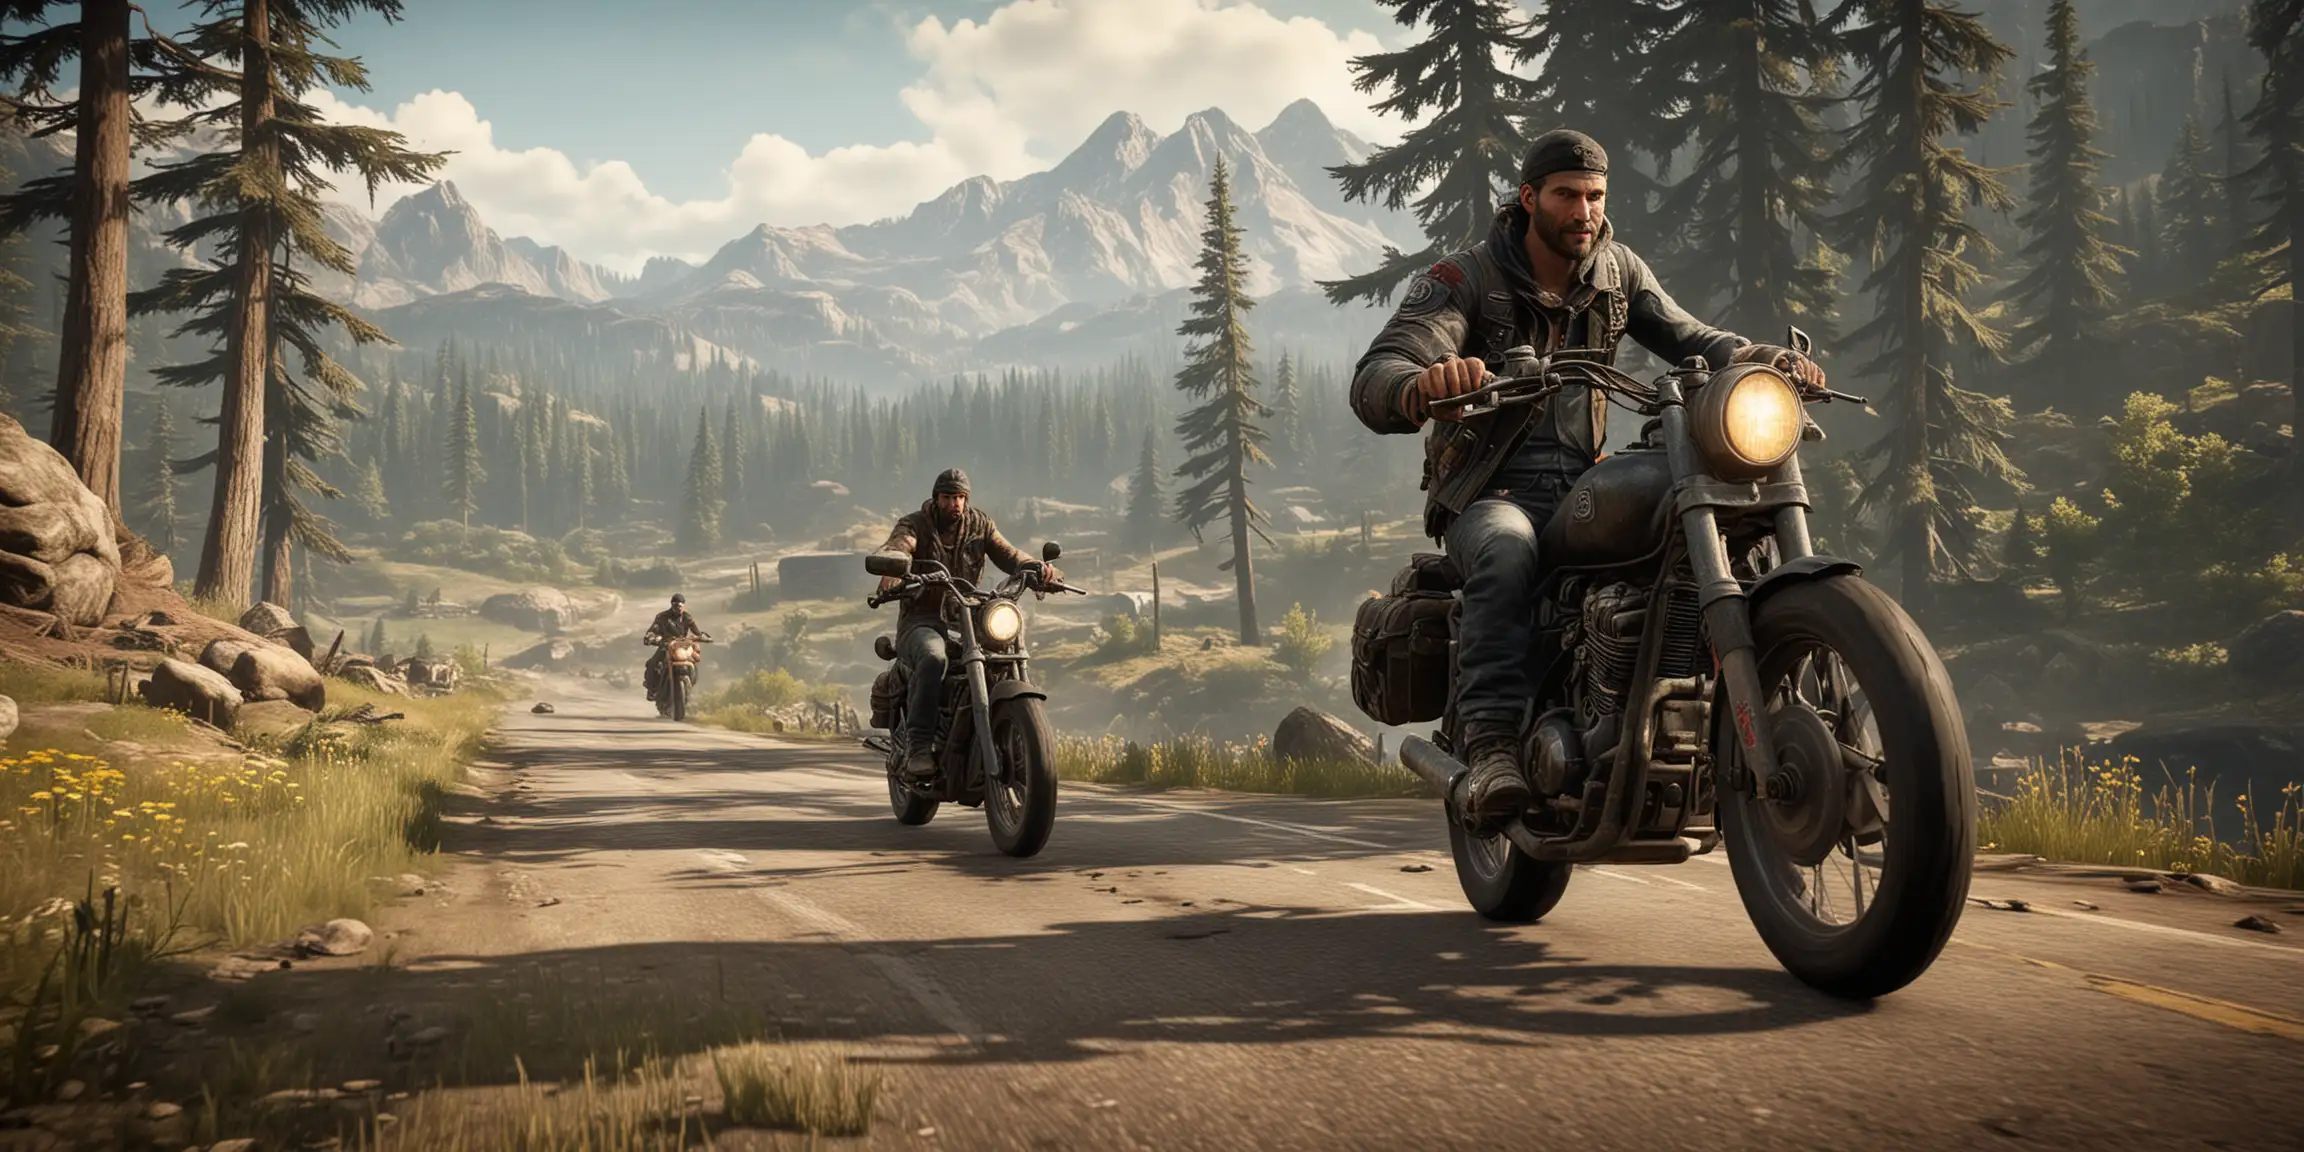 PostApocalyptic Motorcycle Ride Deacon Explores the Desolate Landscape in Days Gone